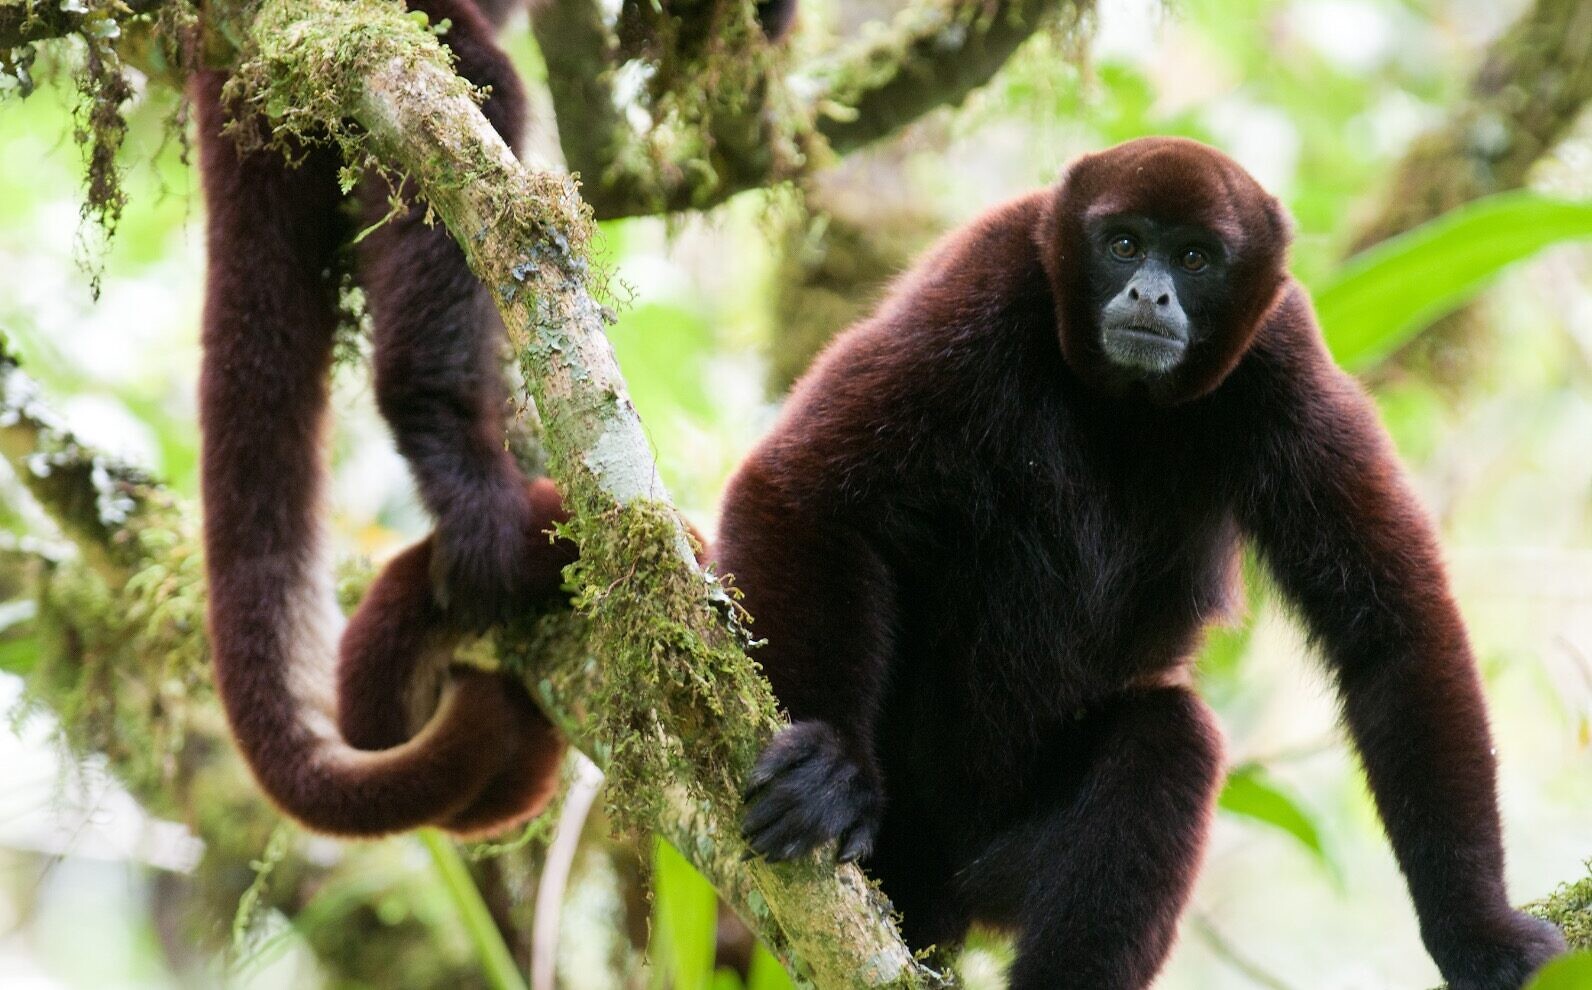 A critically endangered yellow-tailed woolly monkey living in the El Toro forest of the Peruvian Amazon is now protected, thanks to a purchase of land by TIME. (Courtesy TIME)